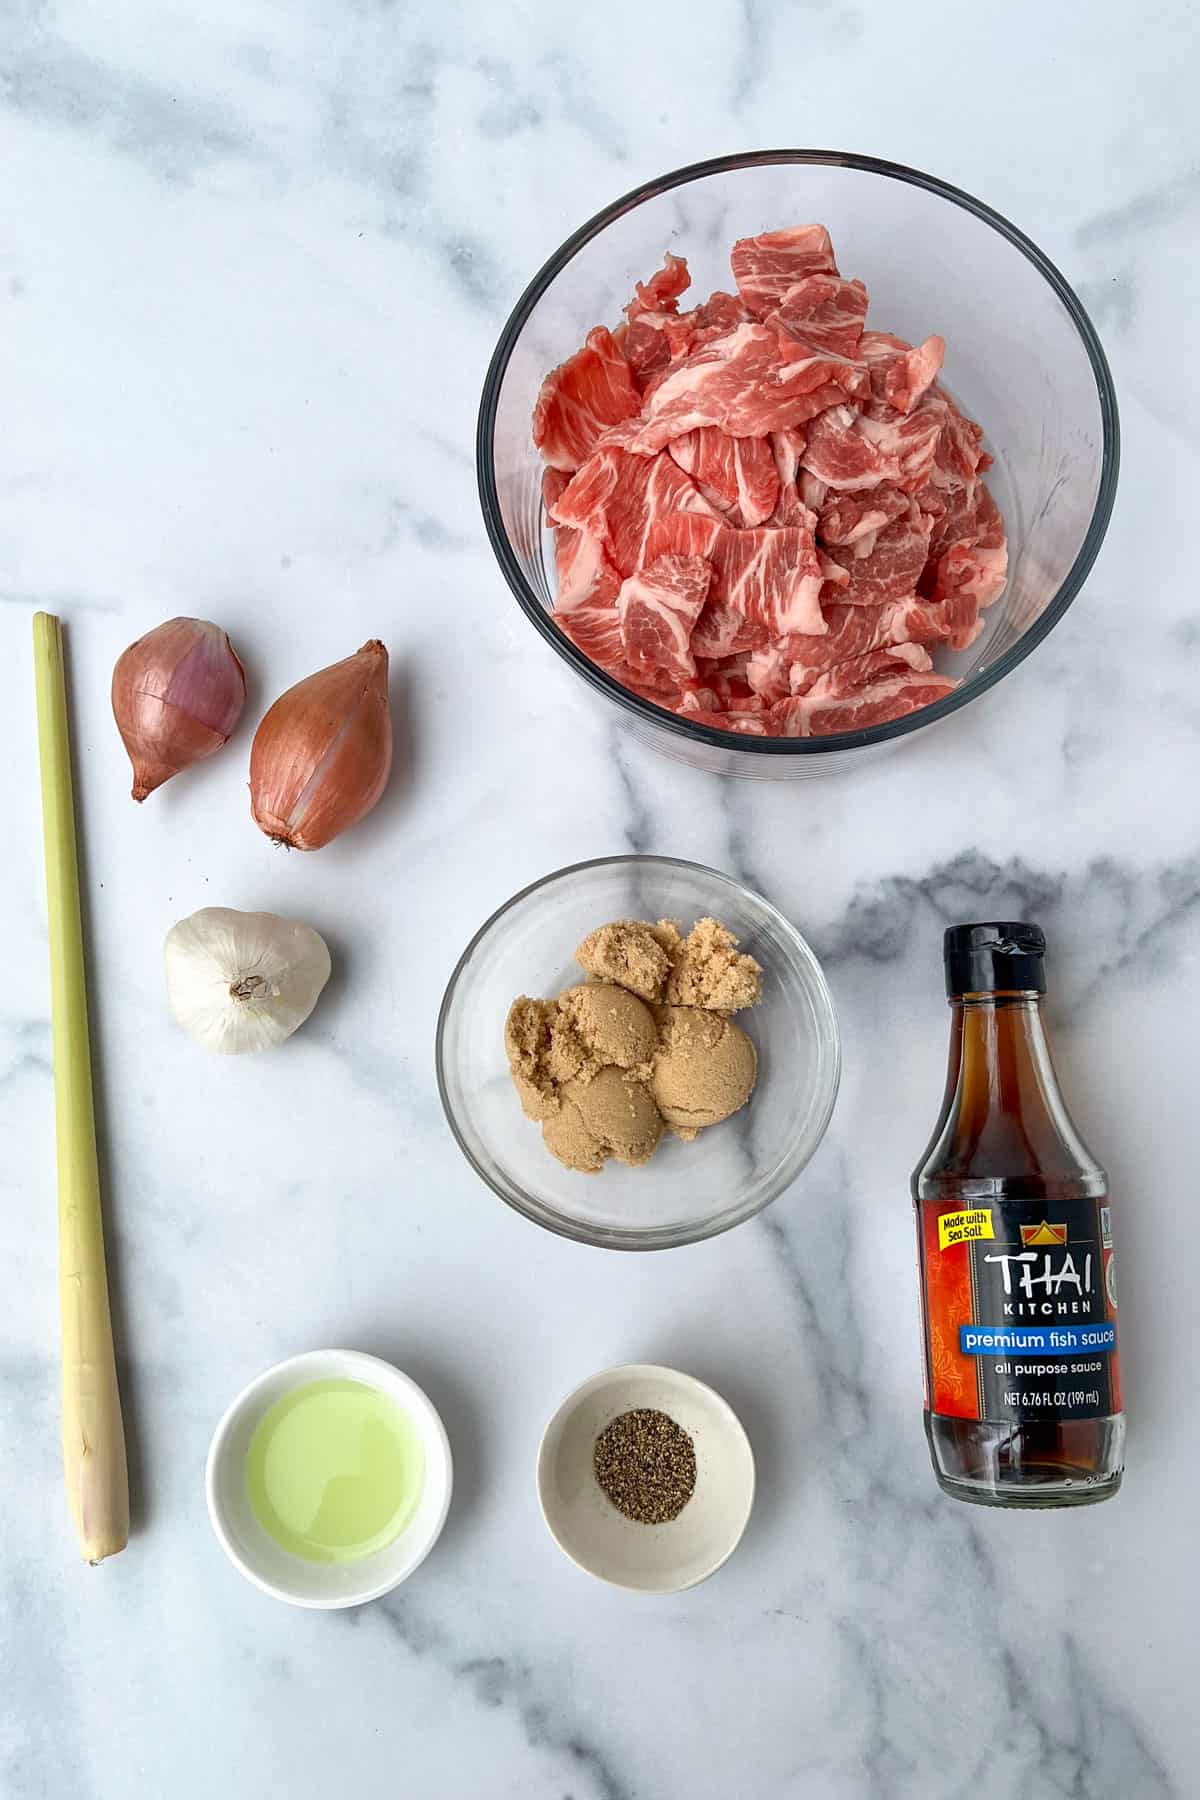 Ingredients on a marble countertop: bowl of thinly sliced pork shoulder, two shallots, a lemongrass stalk, a small bowl of cracked pepper, small bowl of oil, bowl of light brown sugar, bottle of fish sauce